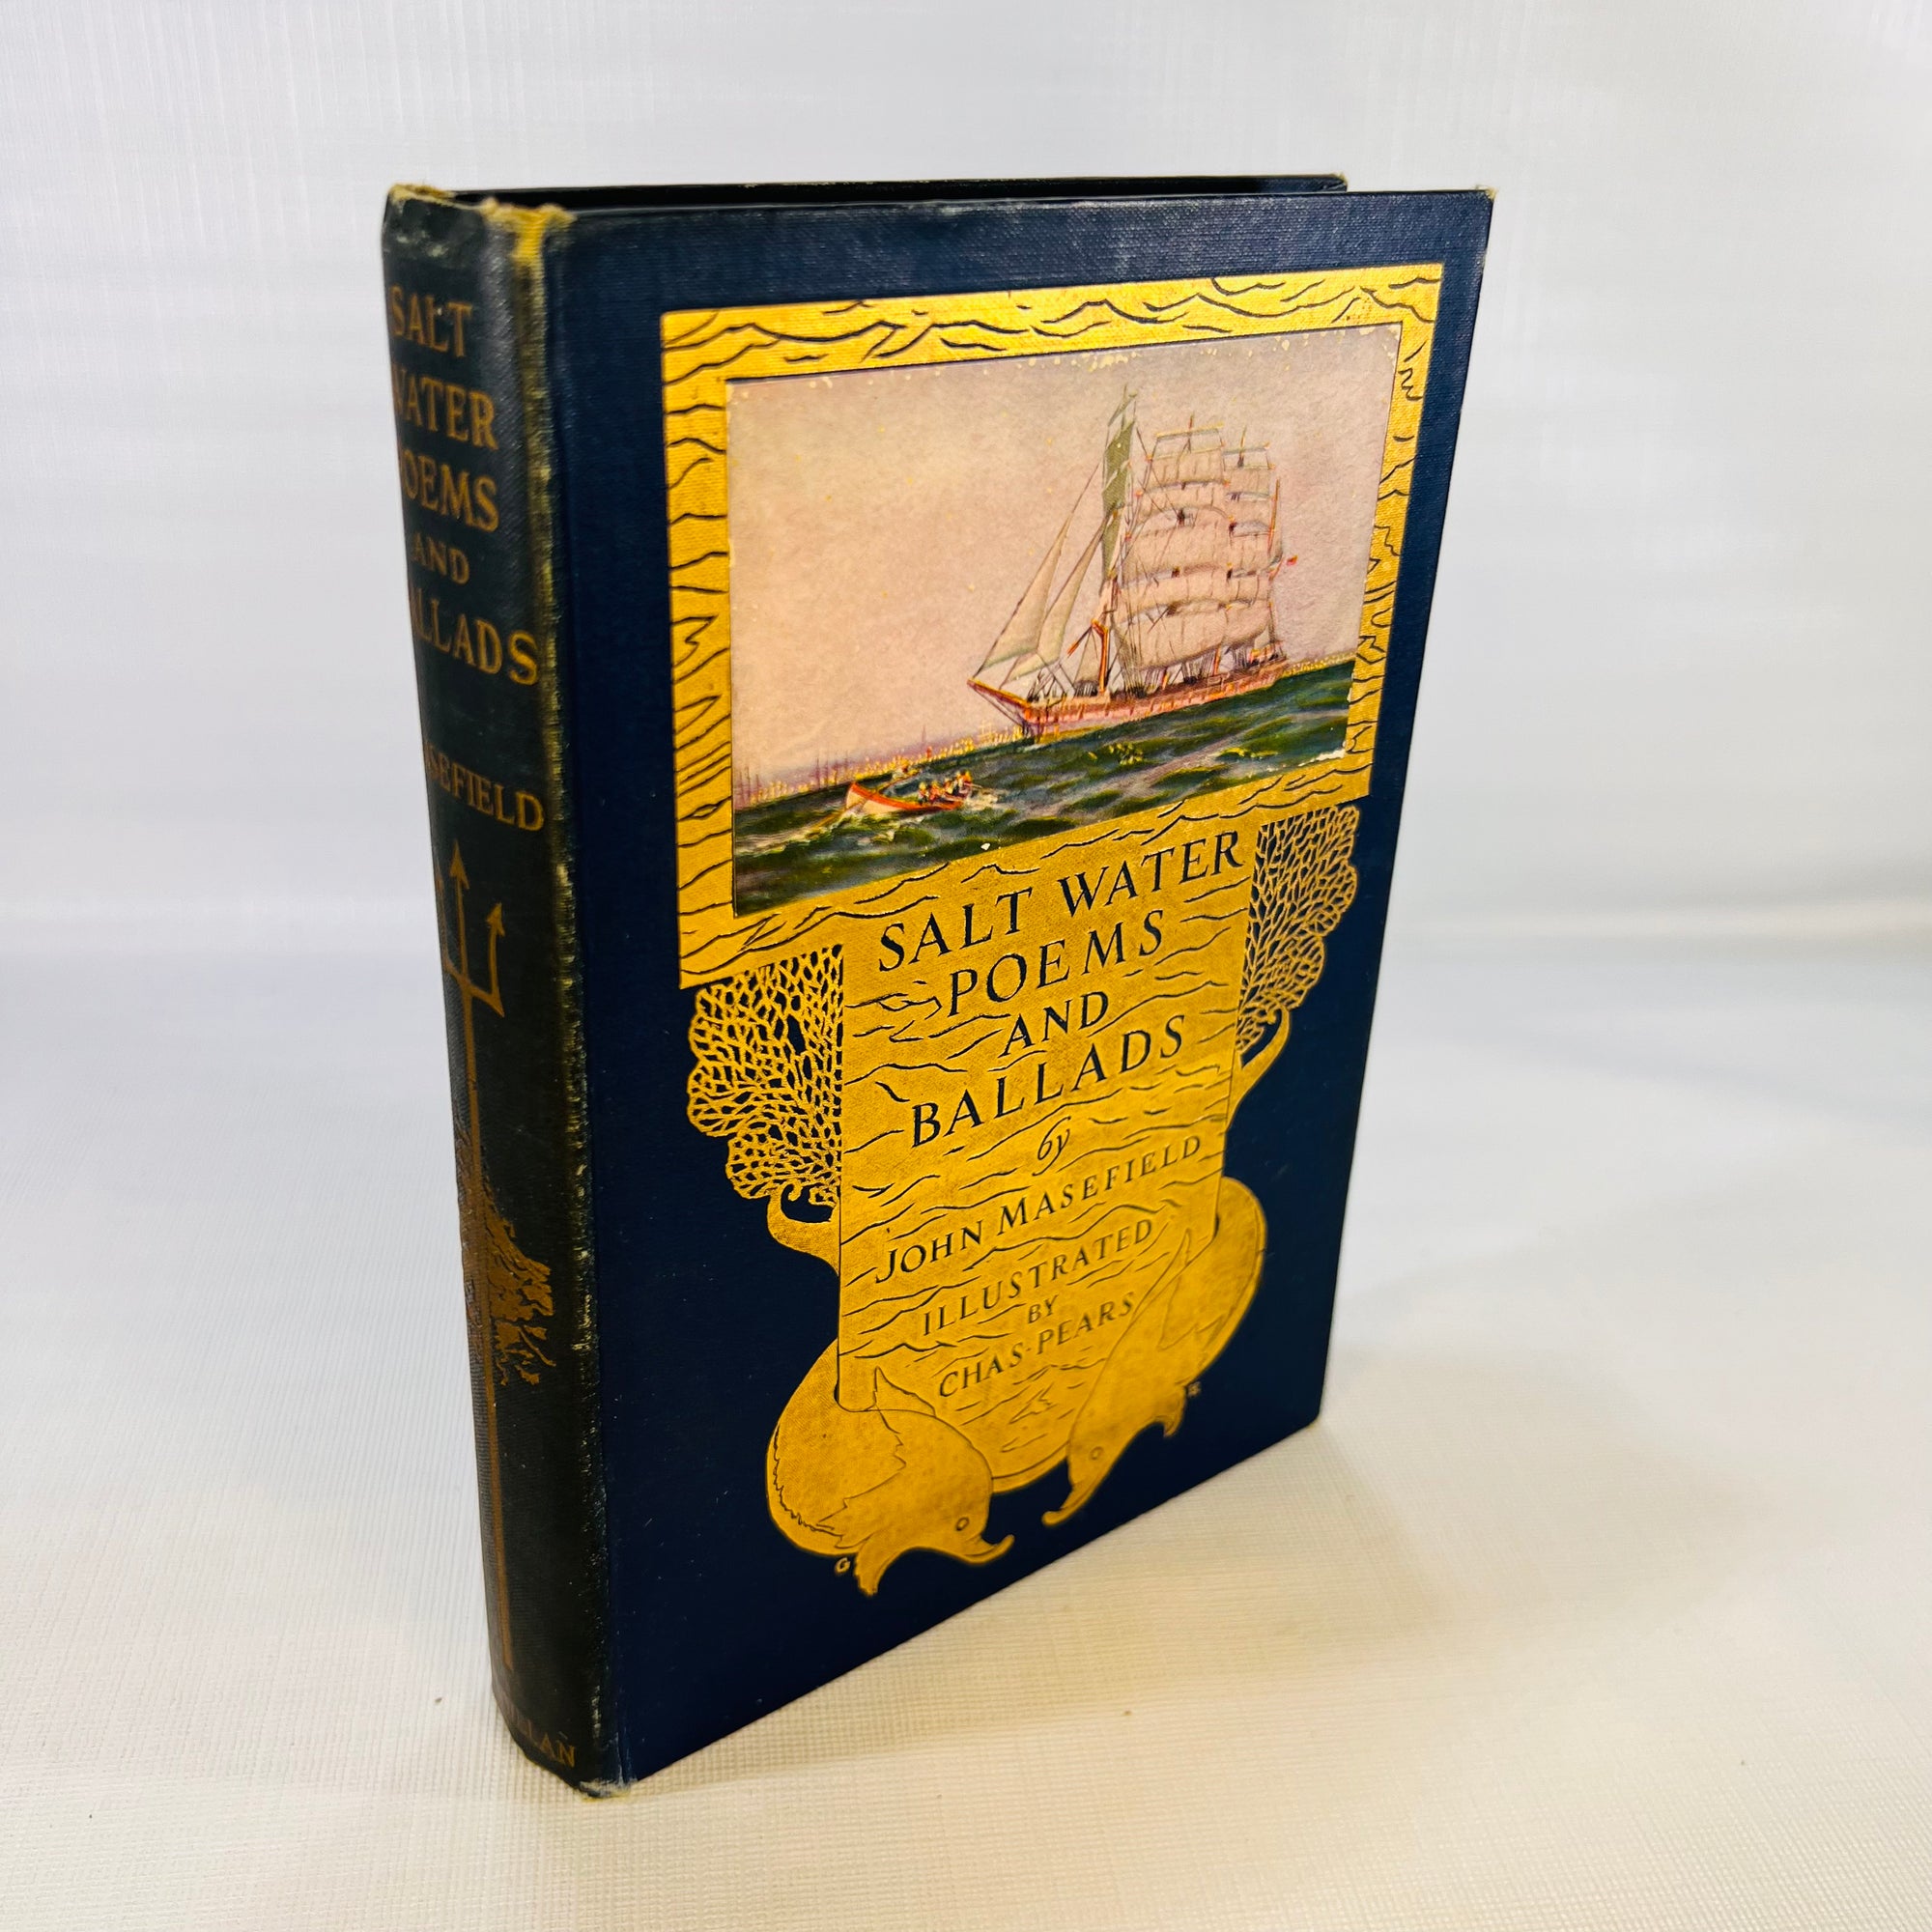 Salt Water Poems and Ballads by John Masefield illustrated by Chas Pears 1916 The Macmillan Company